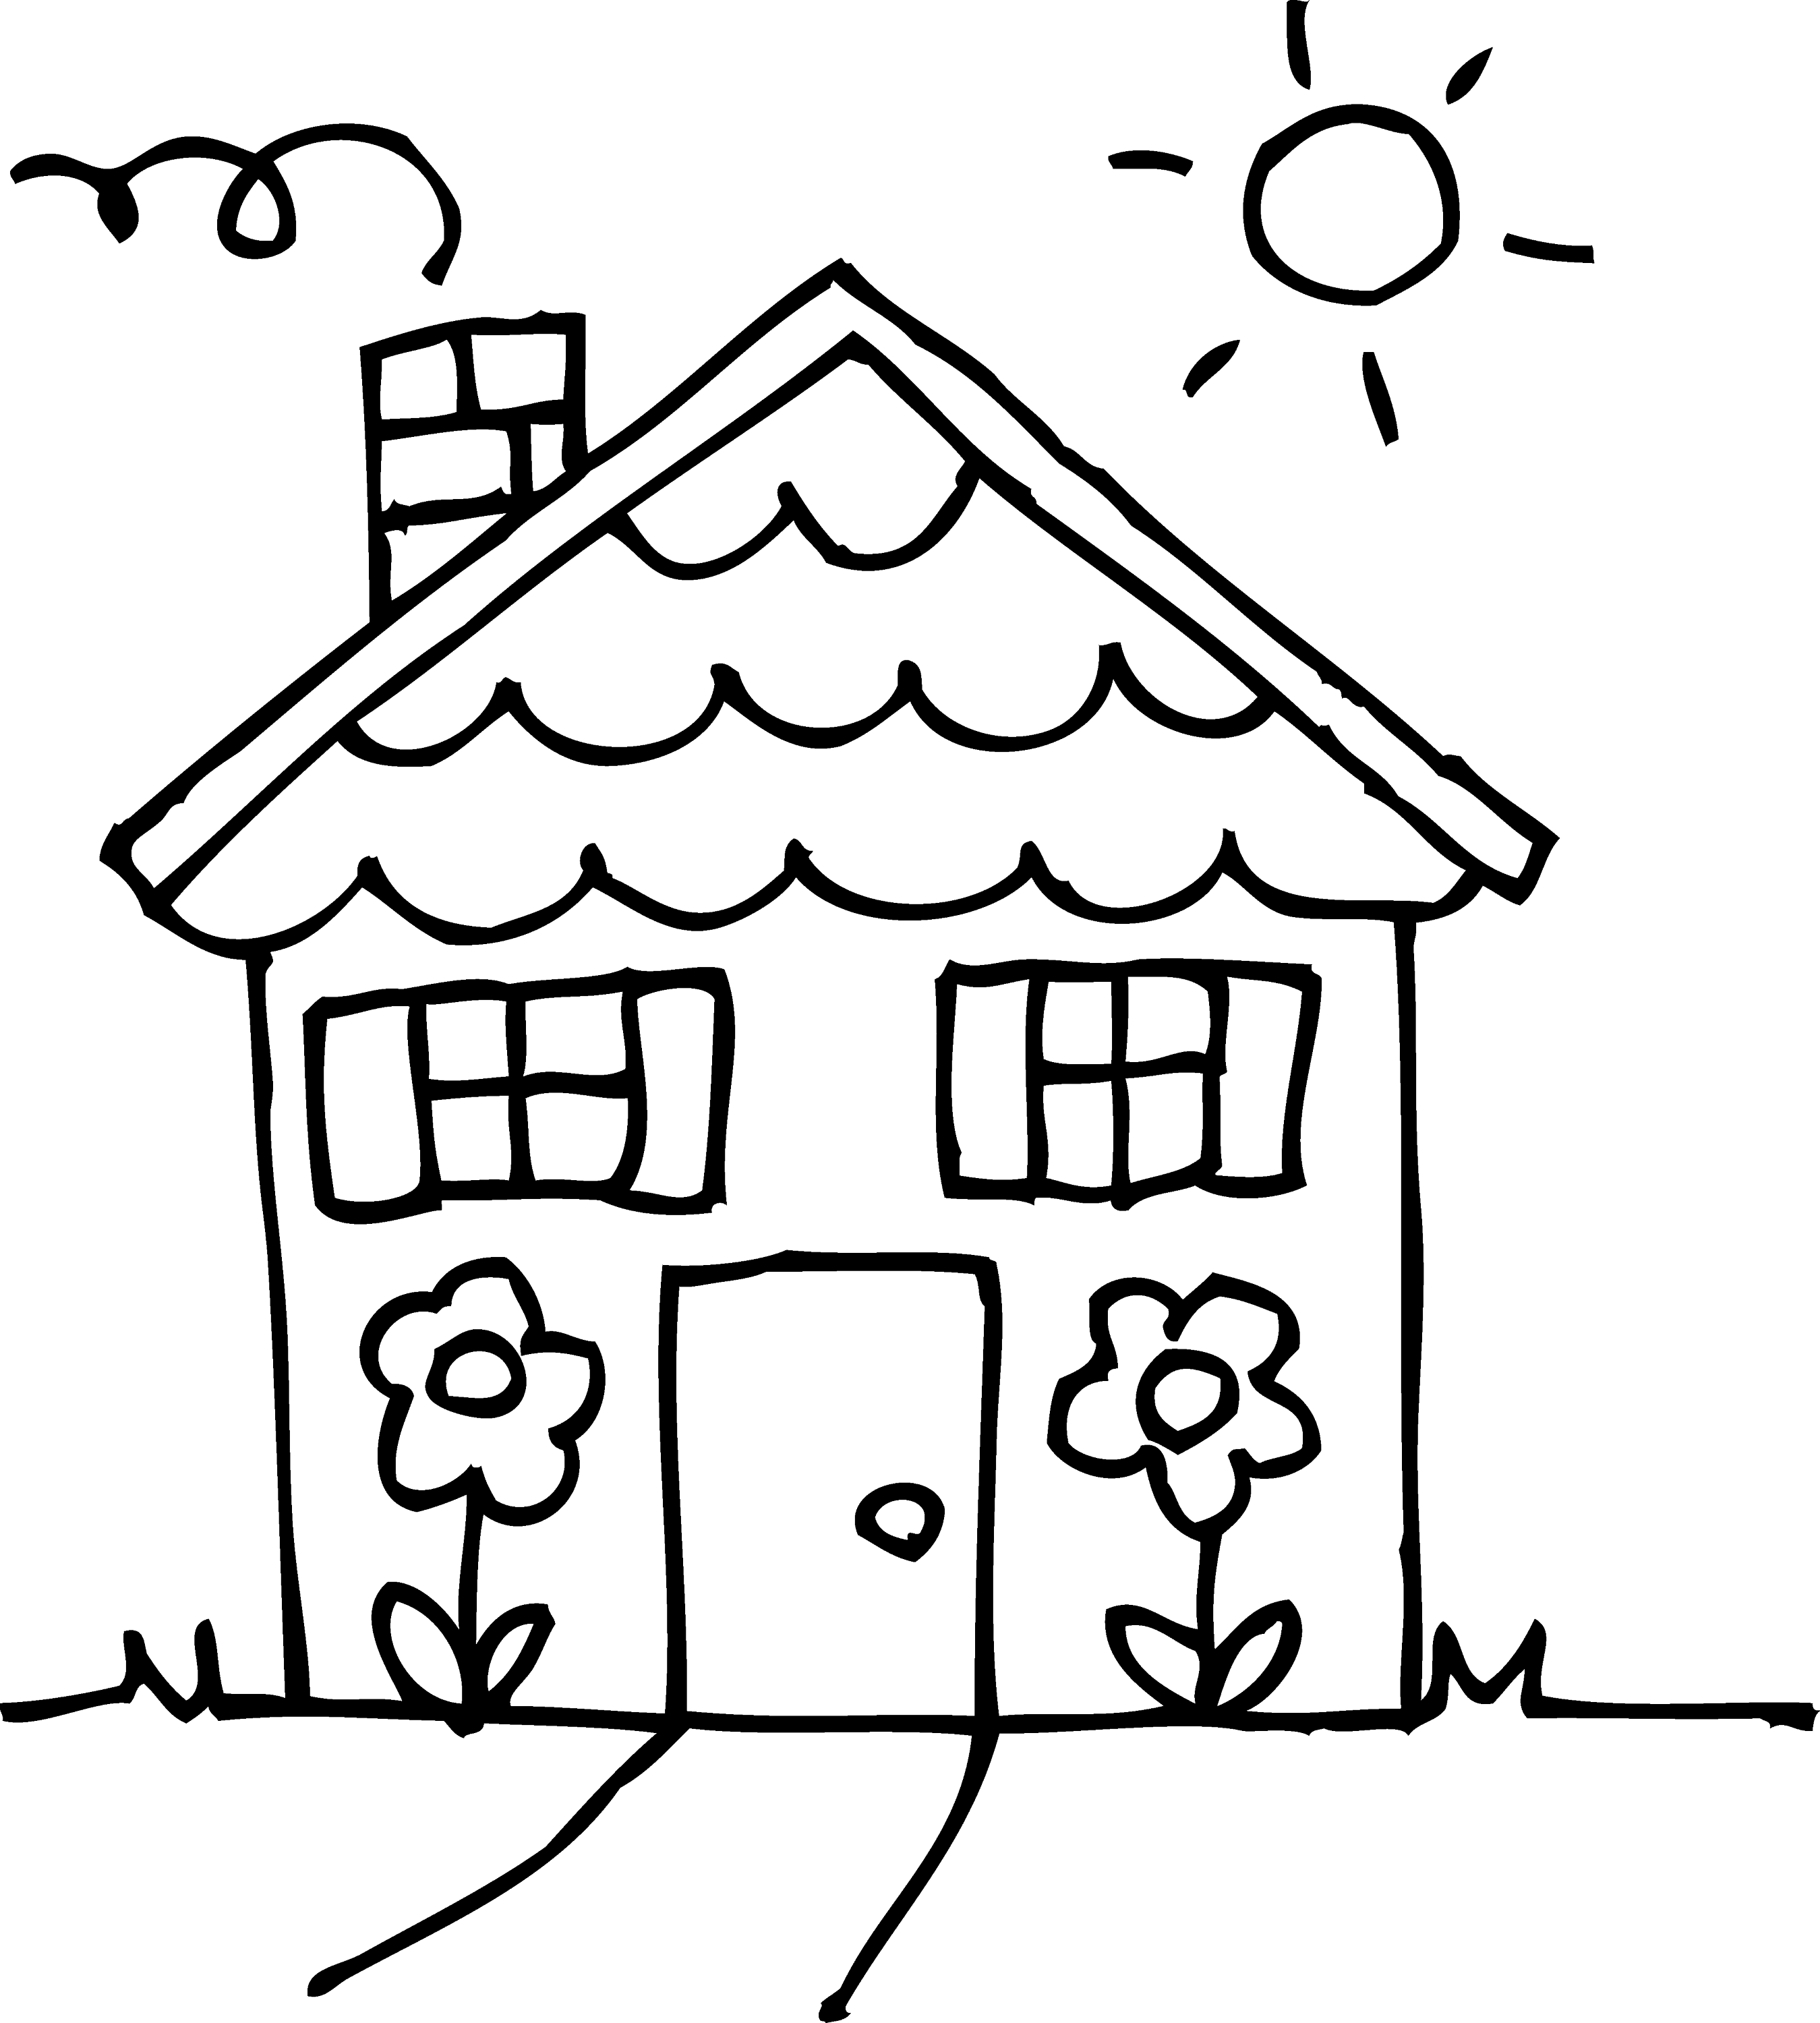 Sunny Day House Coloring Page Free Clip Art